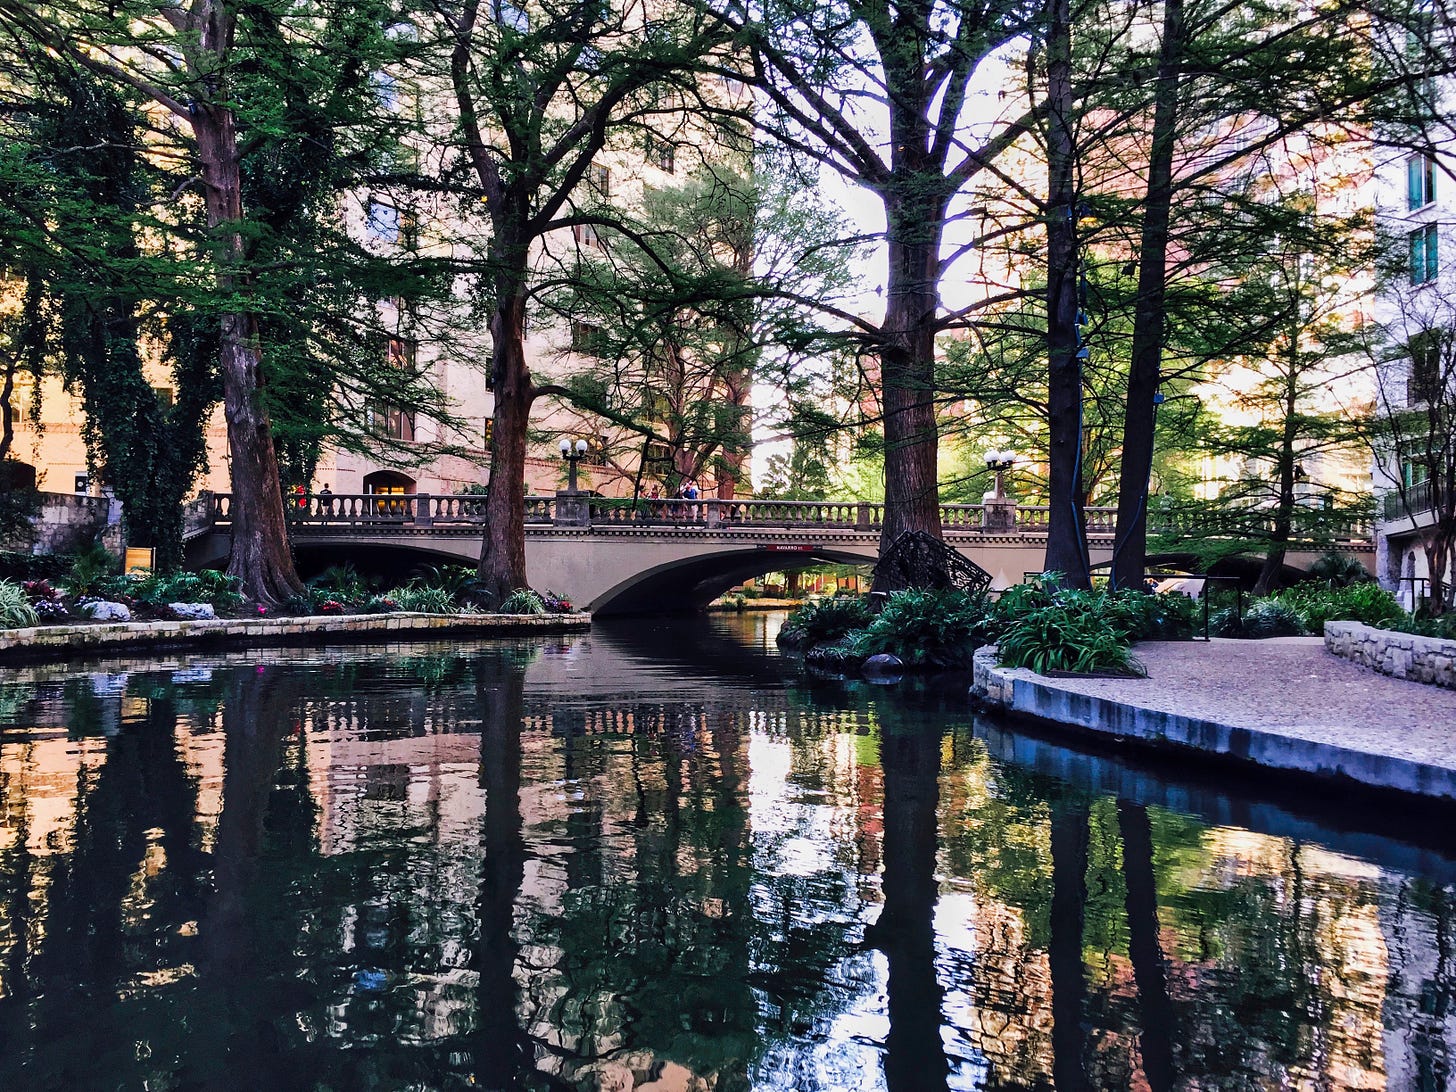 The River Walk in San Antonio Texas at sunset with a view of a small walking bridge crossing the river and the reflection of trees along the bank.